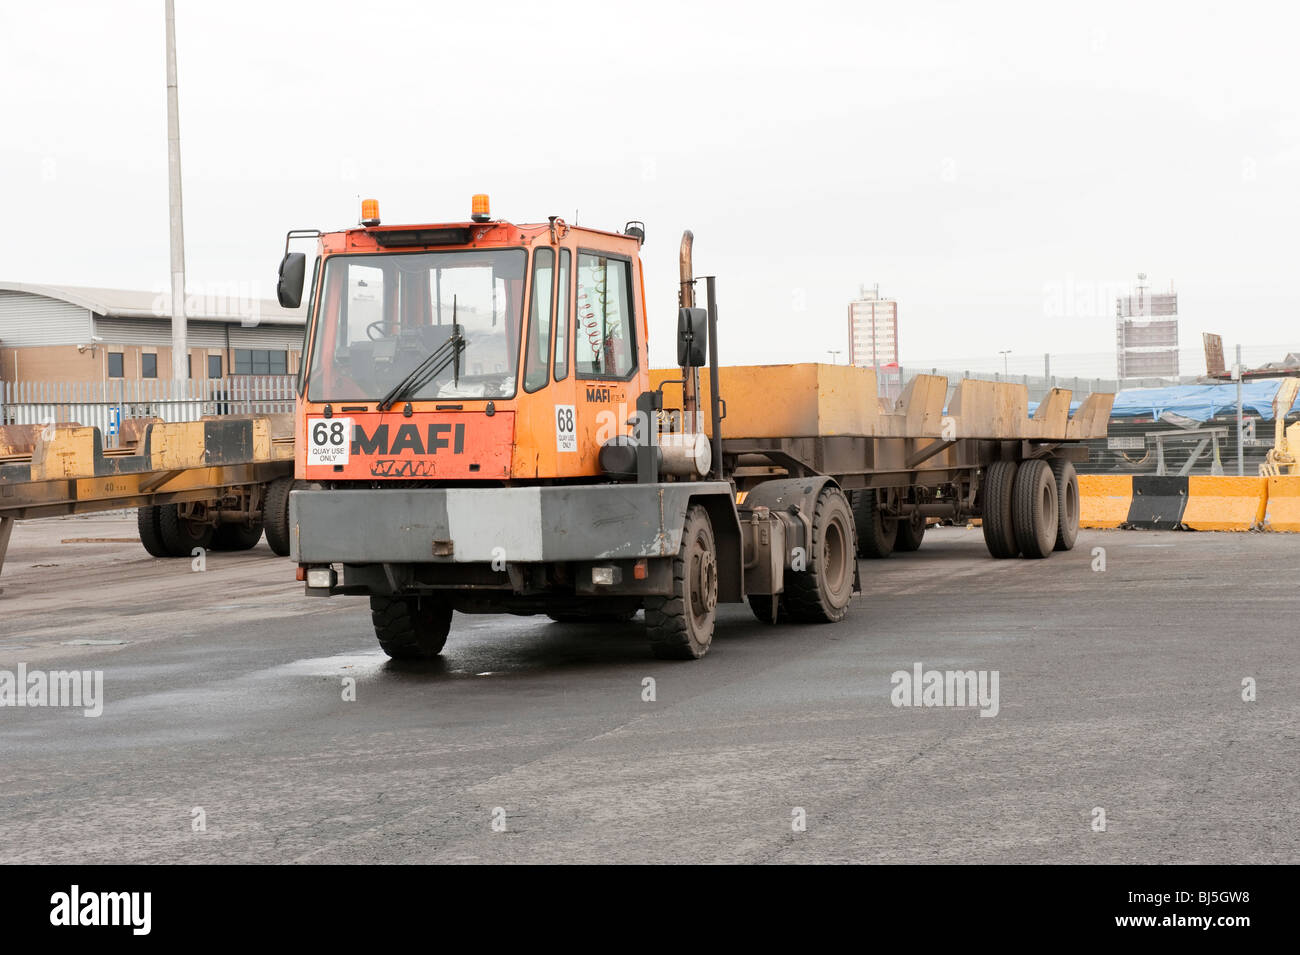 MAFI Articulated lorry tug for shunting trailers Stock Photo